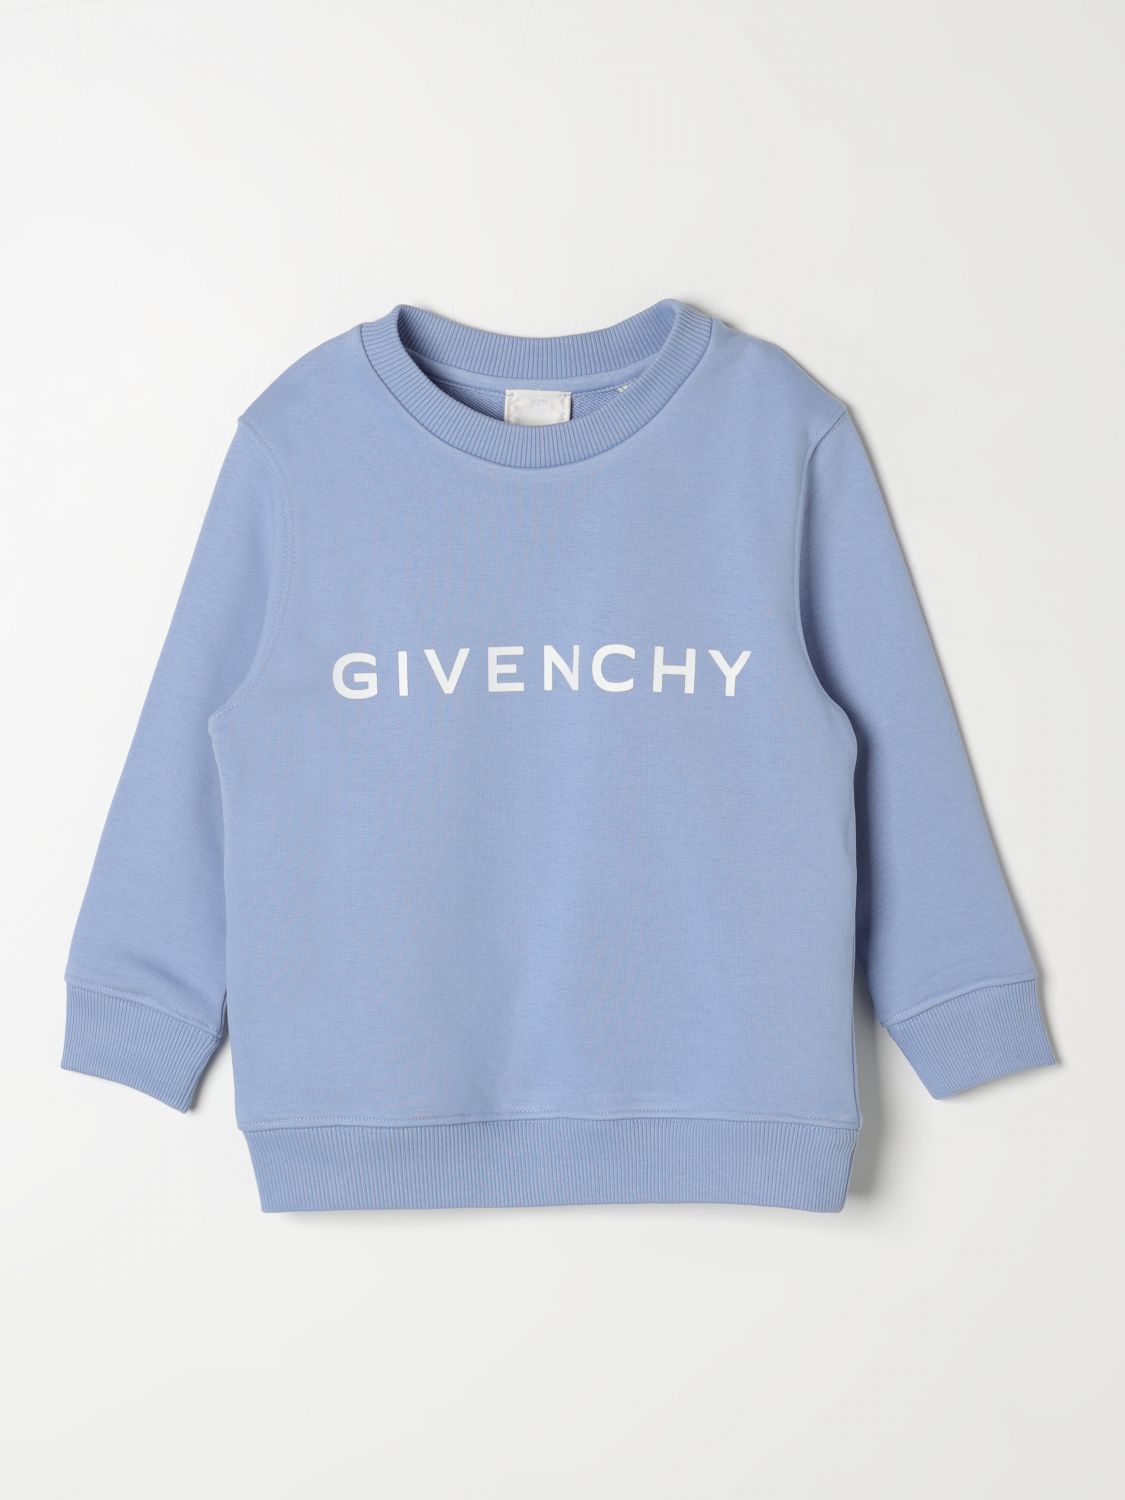 Givenchy Sweater  Kids Color Sky Blue